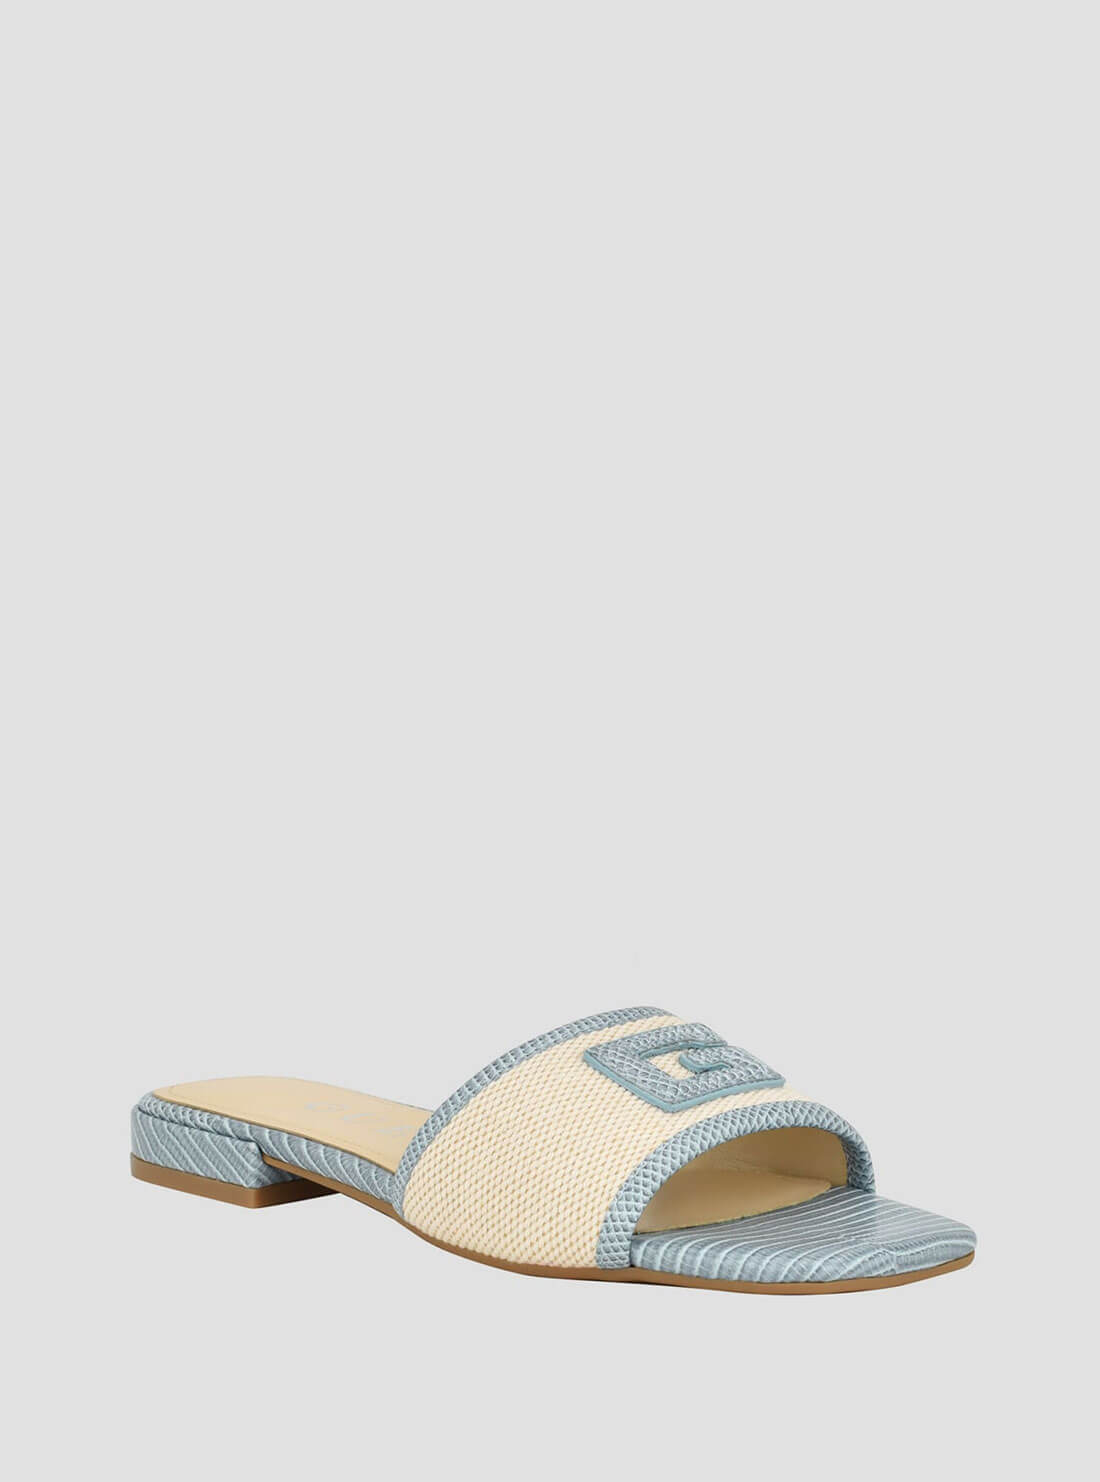 Light Blue Natural Tampa Slide Sandals | GUESS Women's Shoes | front view